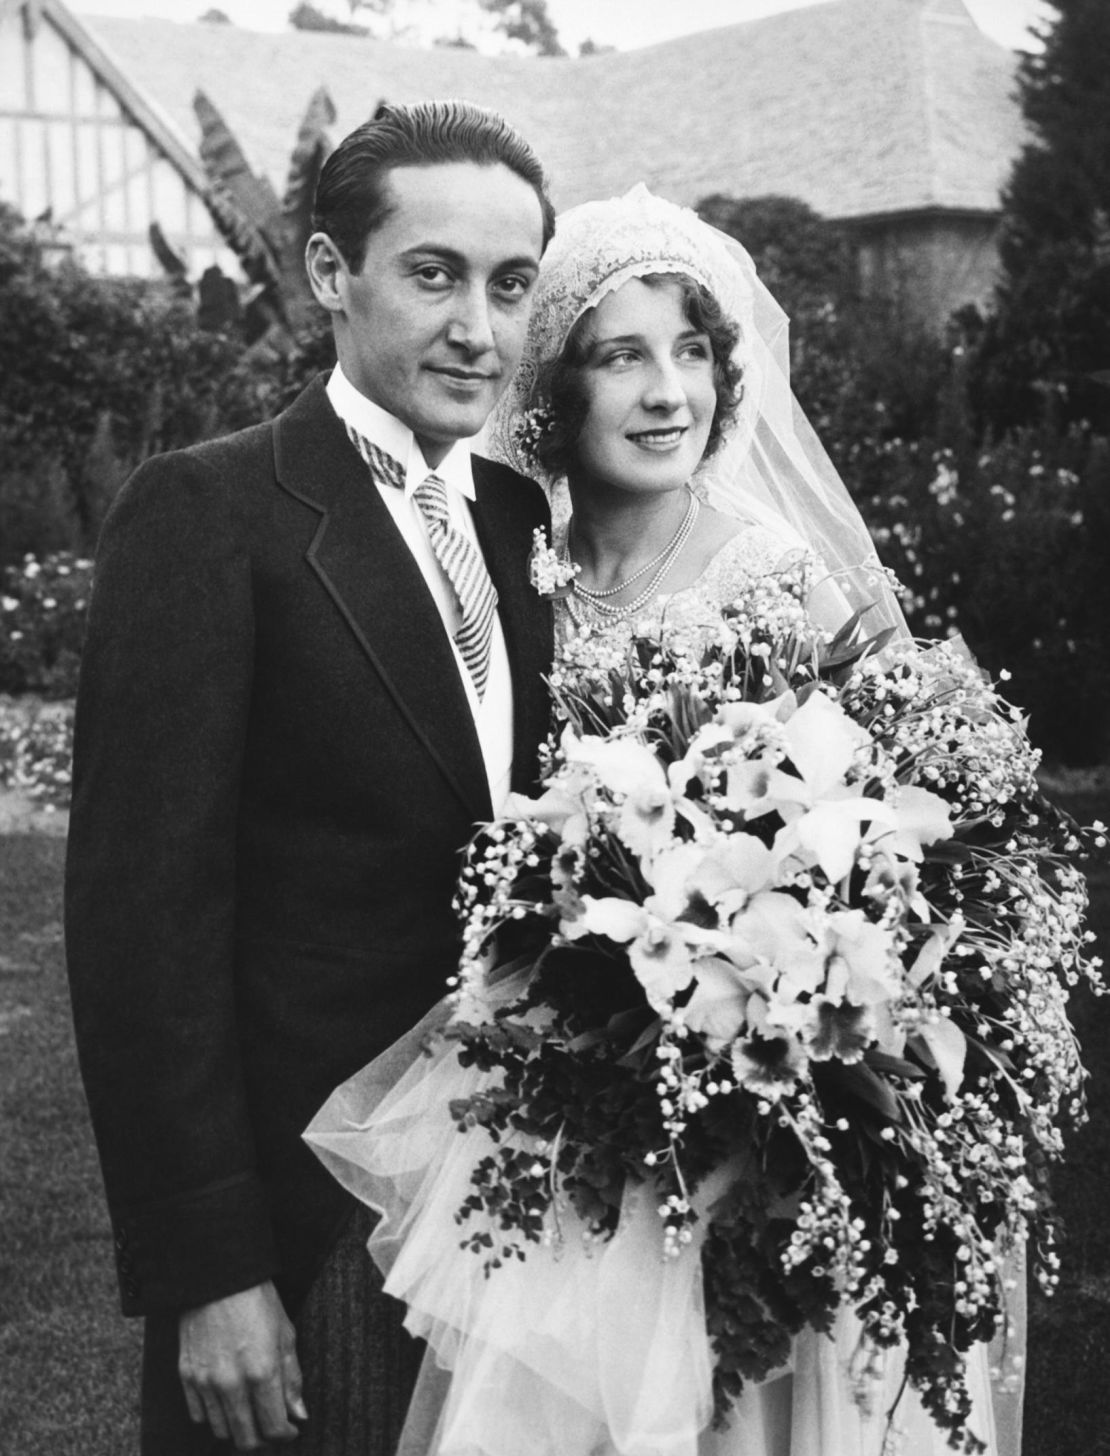 Academy Award-winning actress Norma Shearer and movie producer Irving Thalberg on their wedding day in 1927.